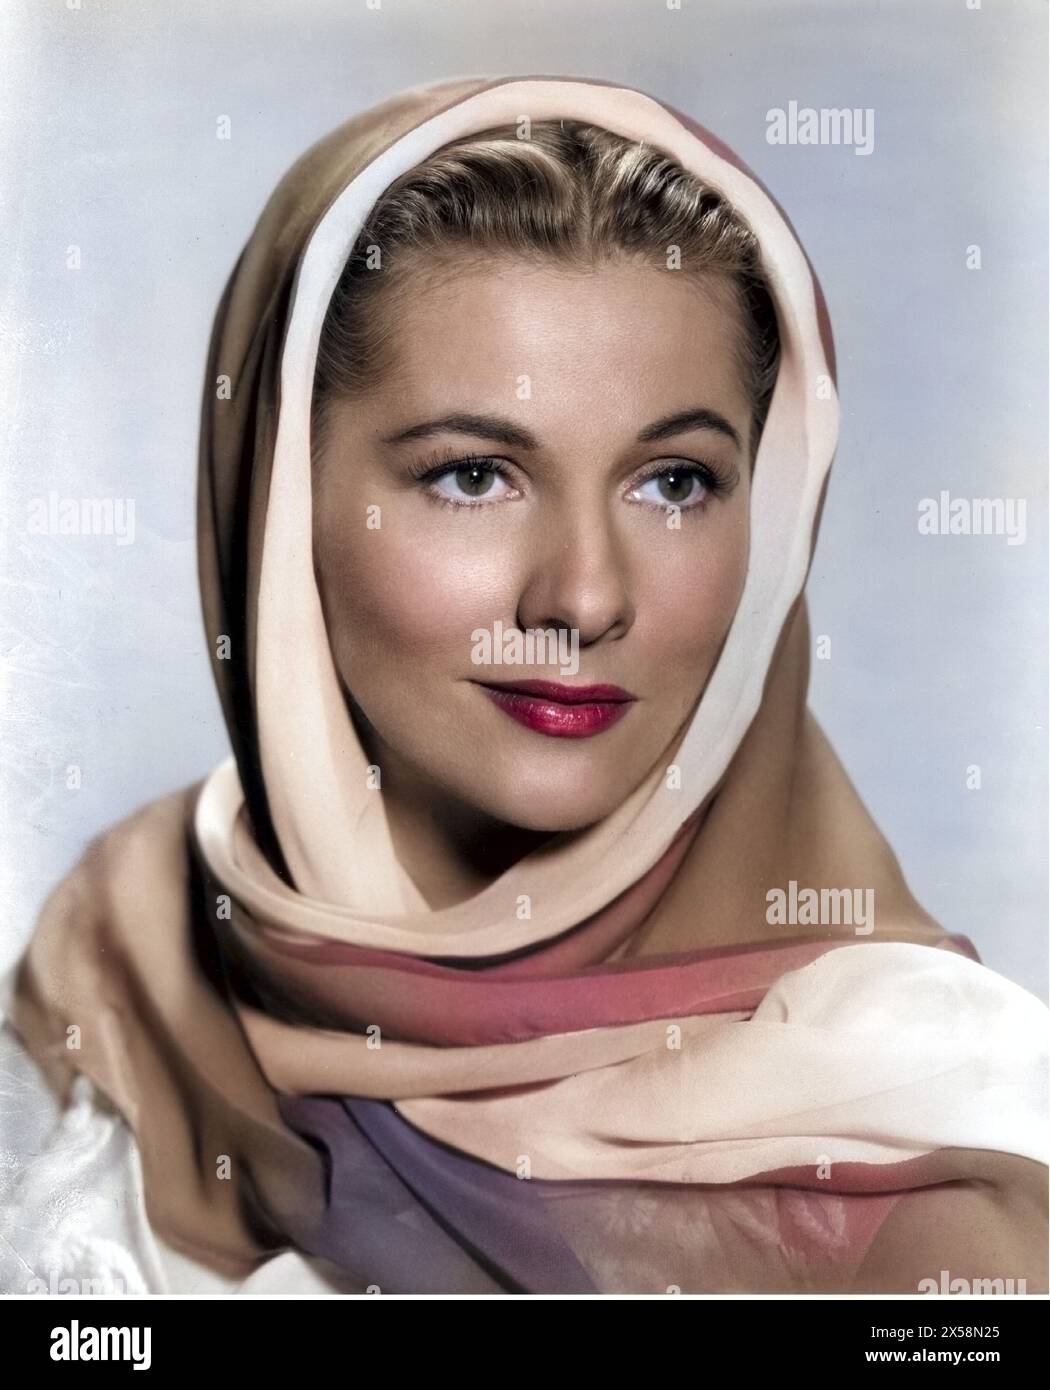 Fontaine, Joan, 22.10.1917 - 15.12.2013, American actress, portrait, 1950s, ADDITIONAL-RIGHTS-CLEARANCE-INFO-NOT-AVAILABLE Stock Photo